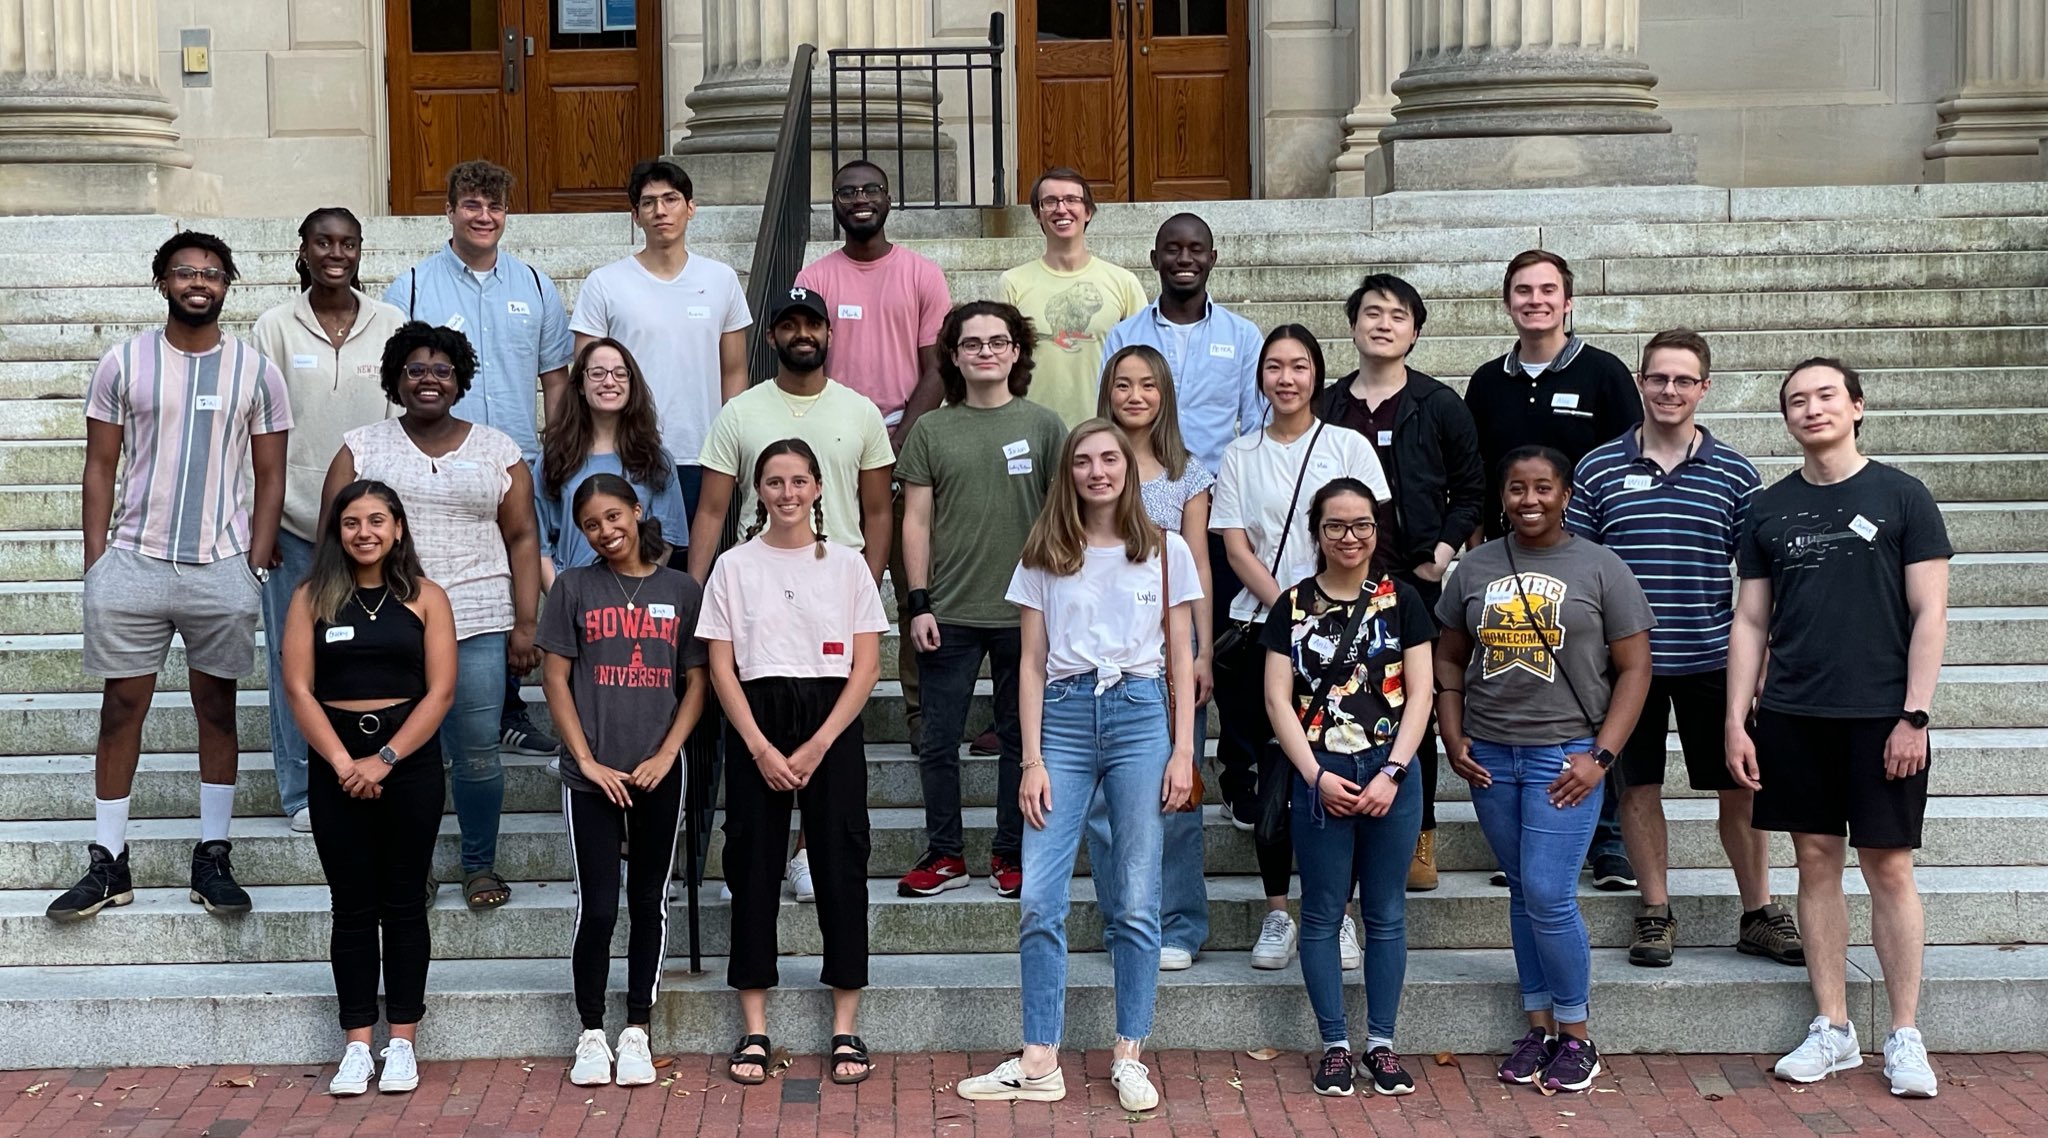 A group photo with Rosetta Interns from around the US. June 2021, Chapel Hill, NC